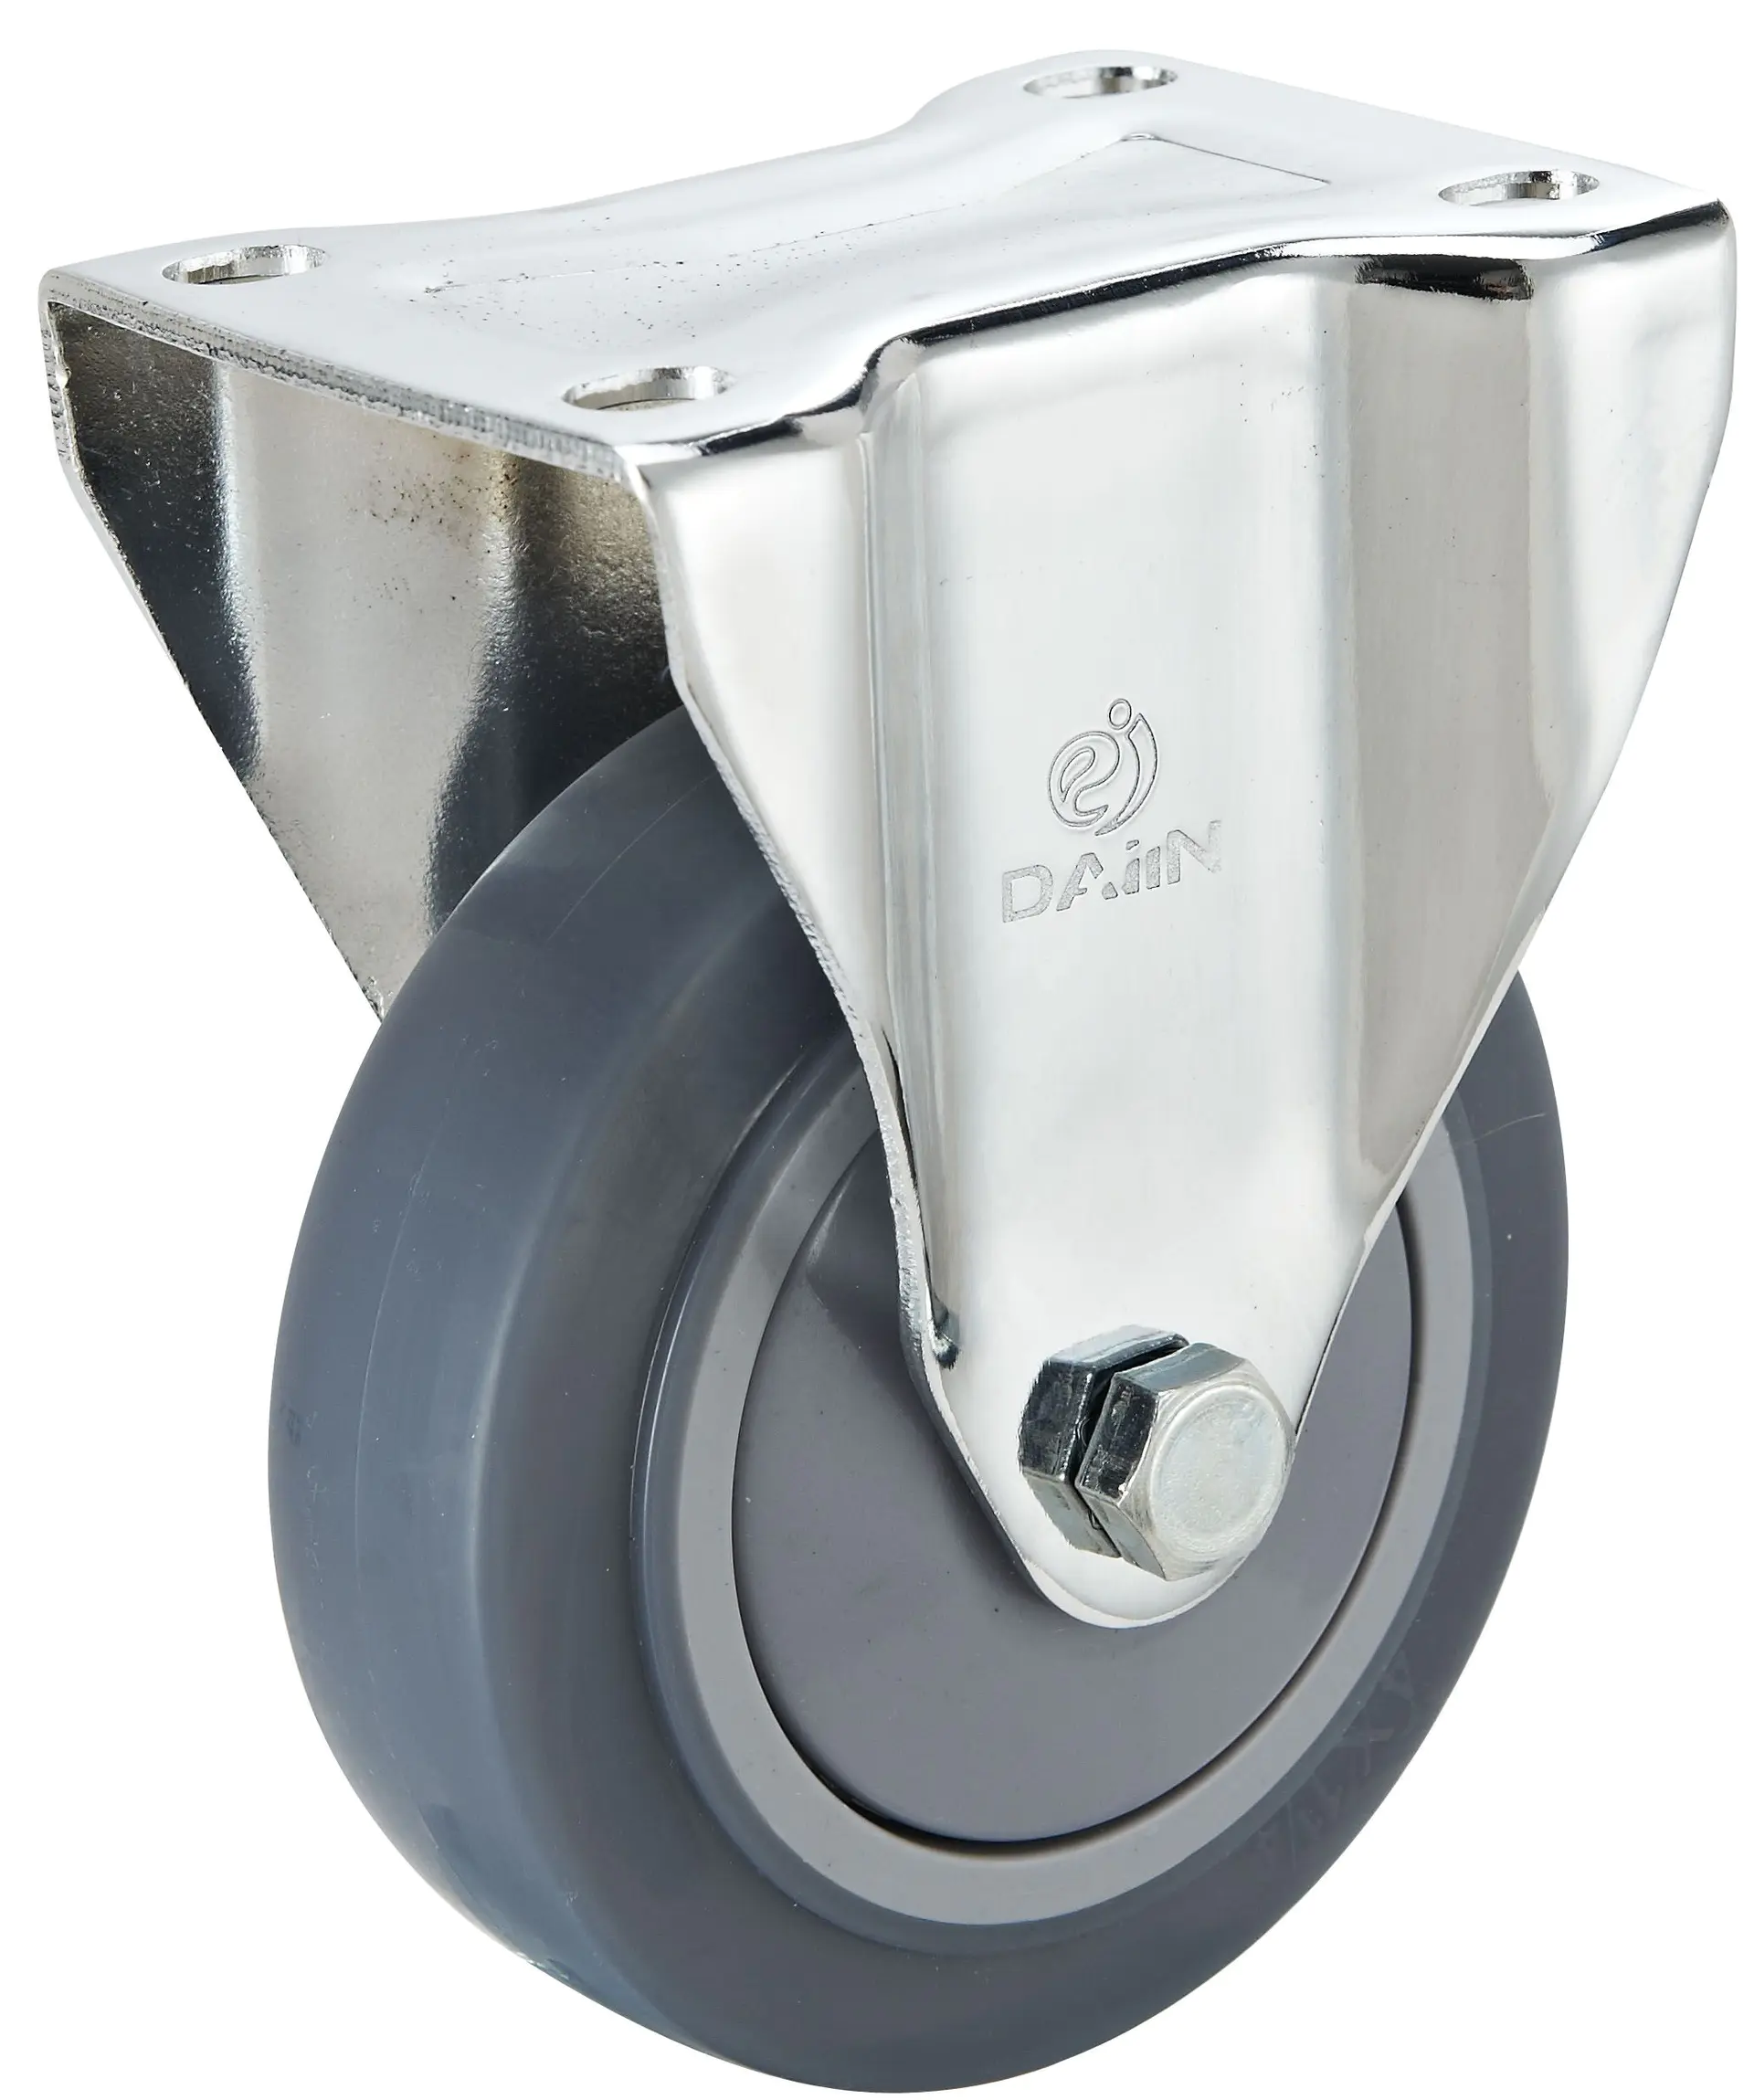 4 Inch Top Plate Trolley Wheel With Bearing Industrial Castering Equipment Platform Heavy Duty Trolley Cart Caster Wheels